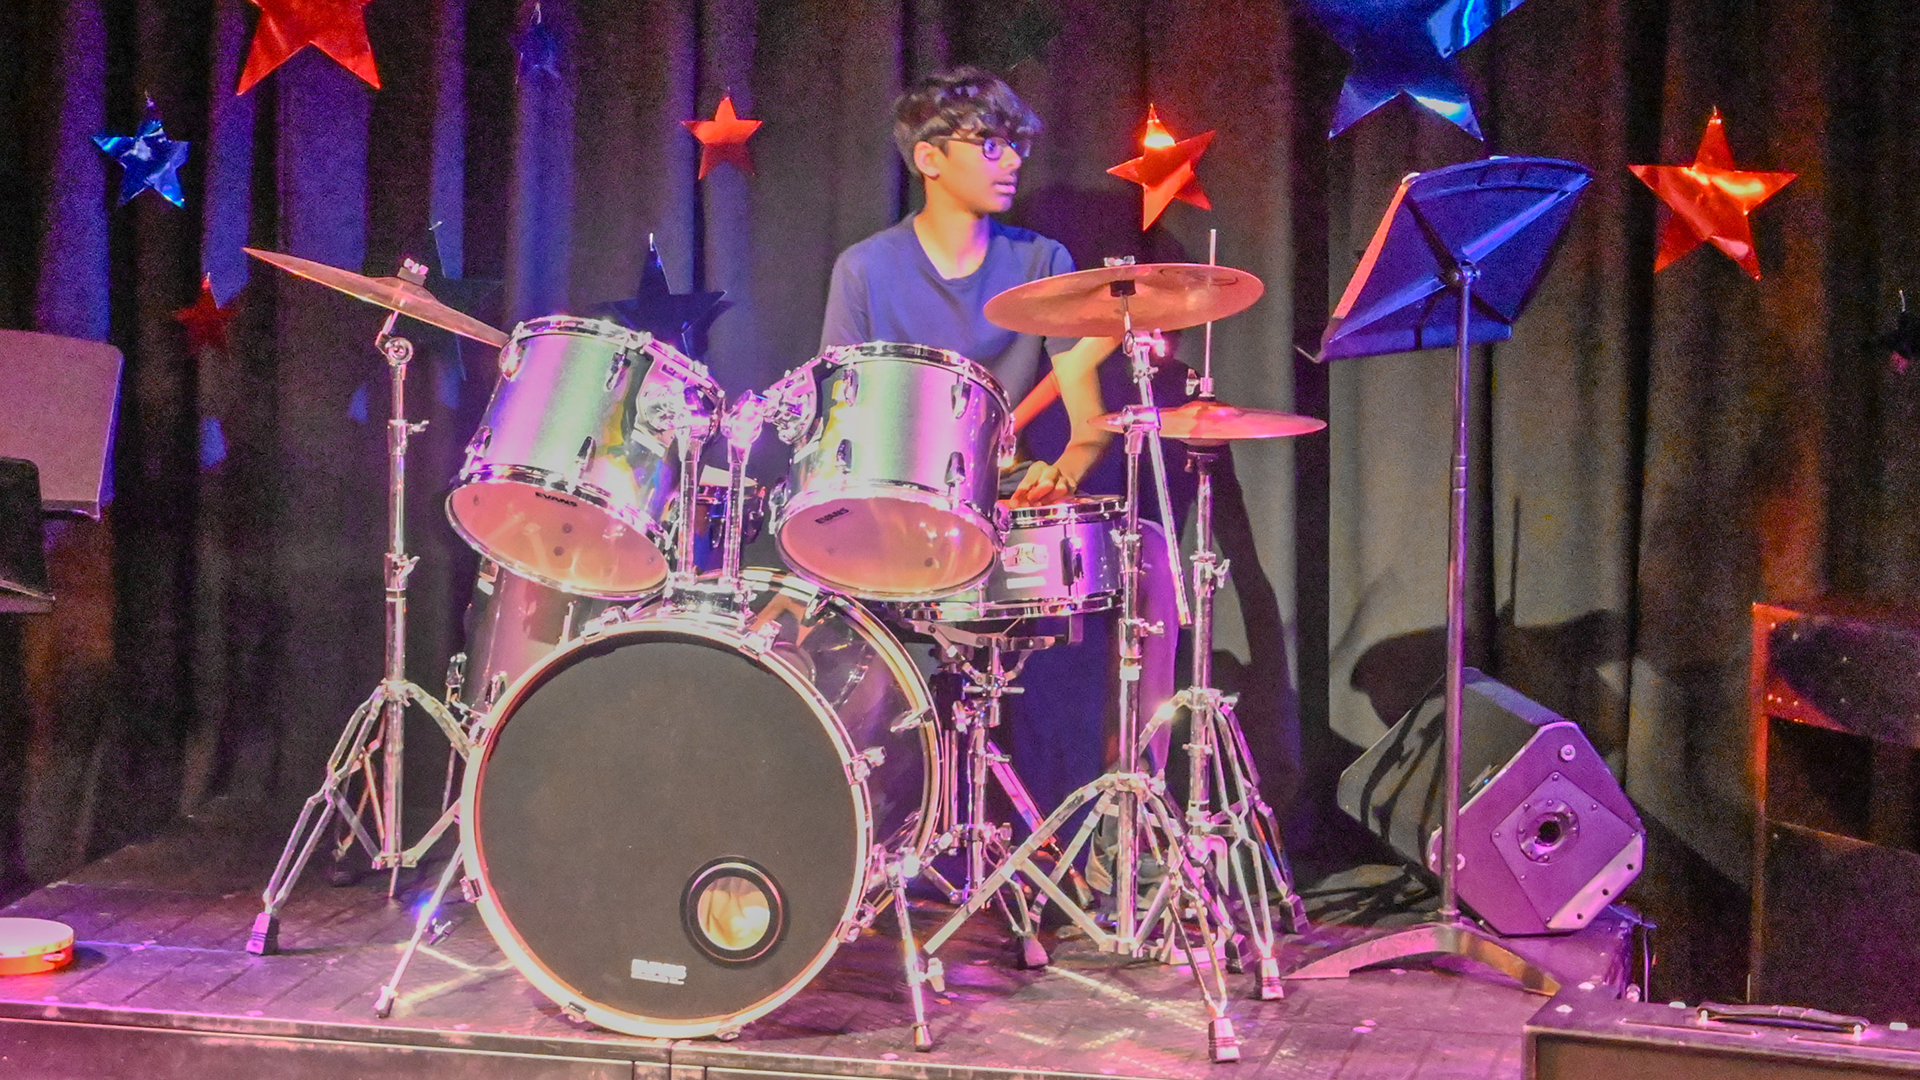 Boy on drums performing on stage at the Freemen's LIVE show